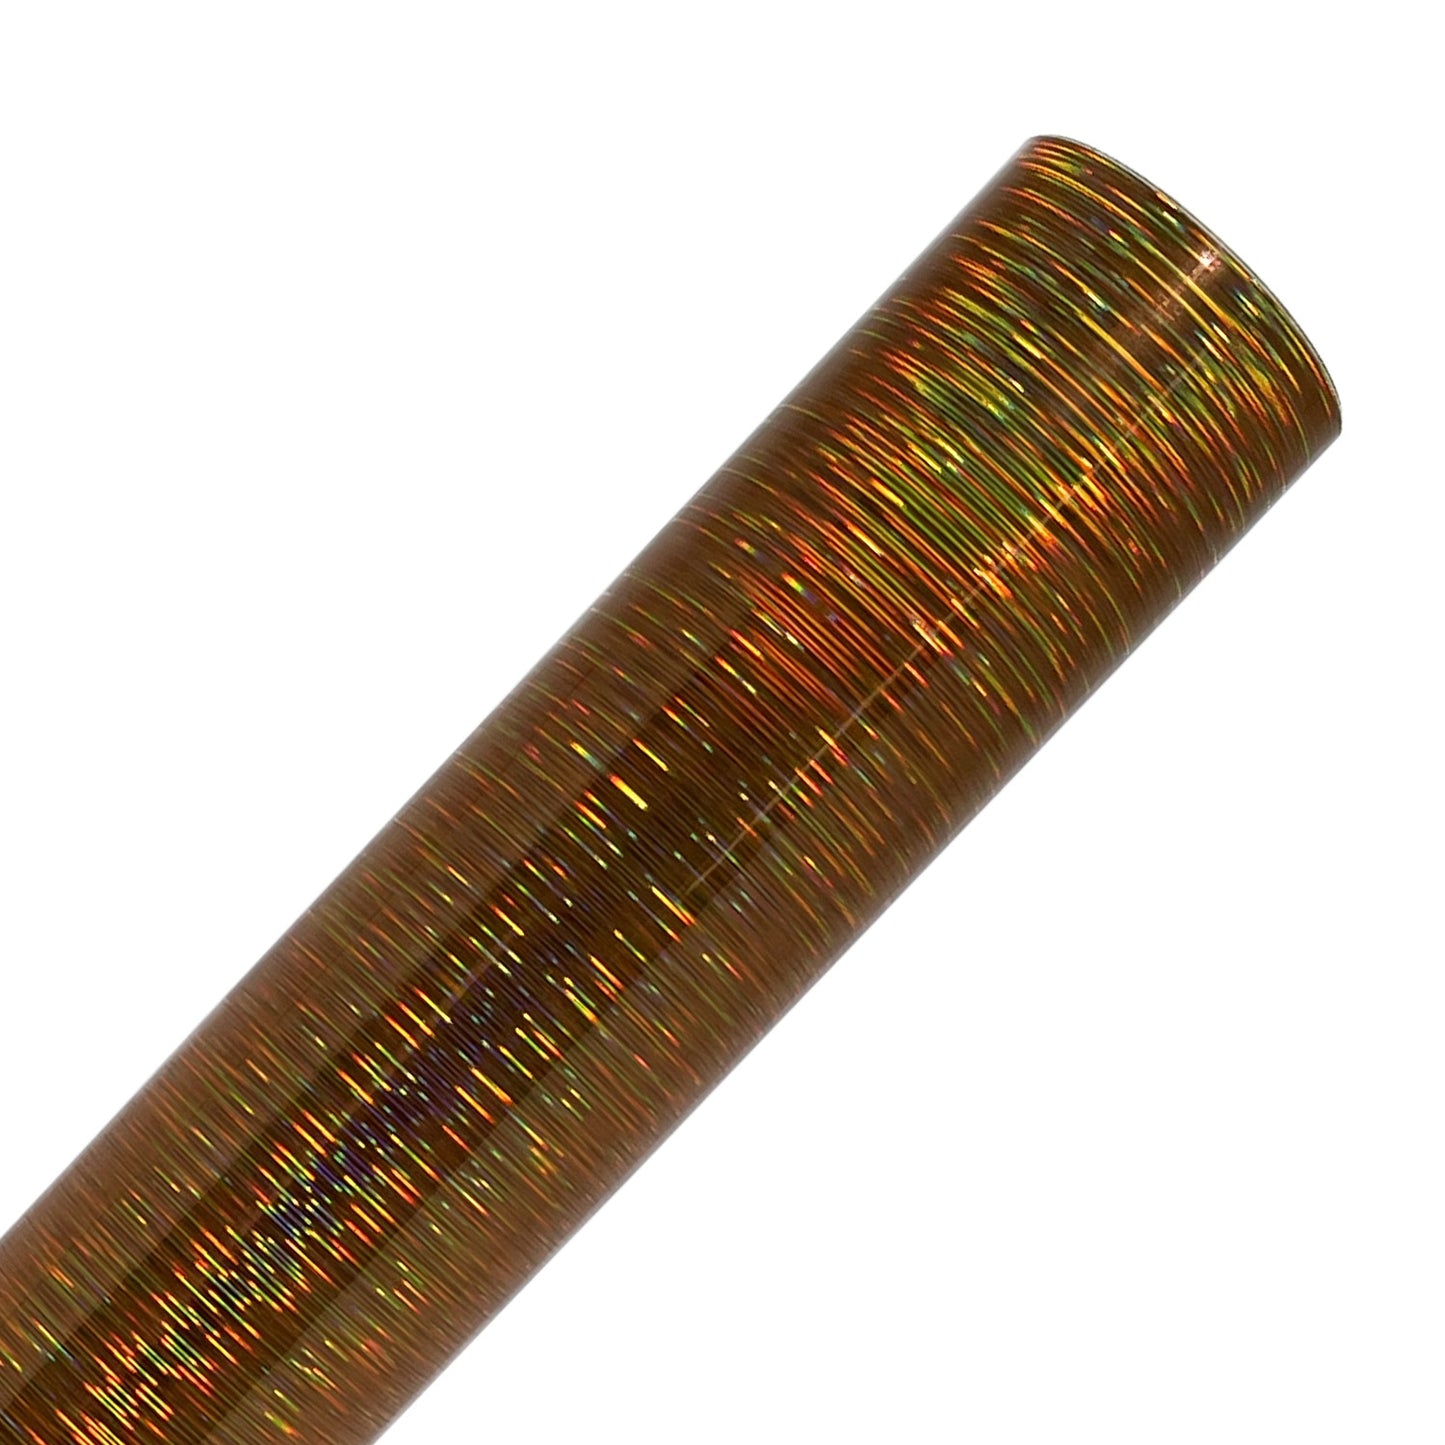 Orange Brushed Holographic Adhesive Vinyl Rolls By Craftables